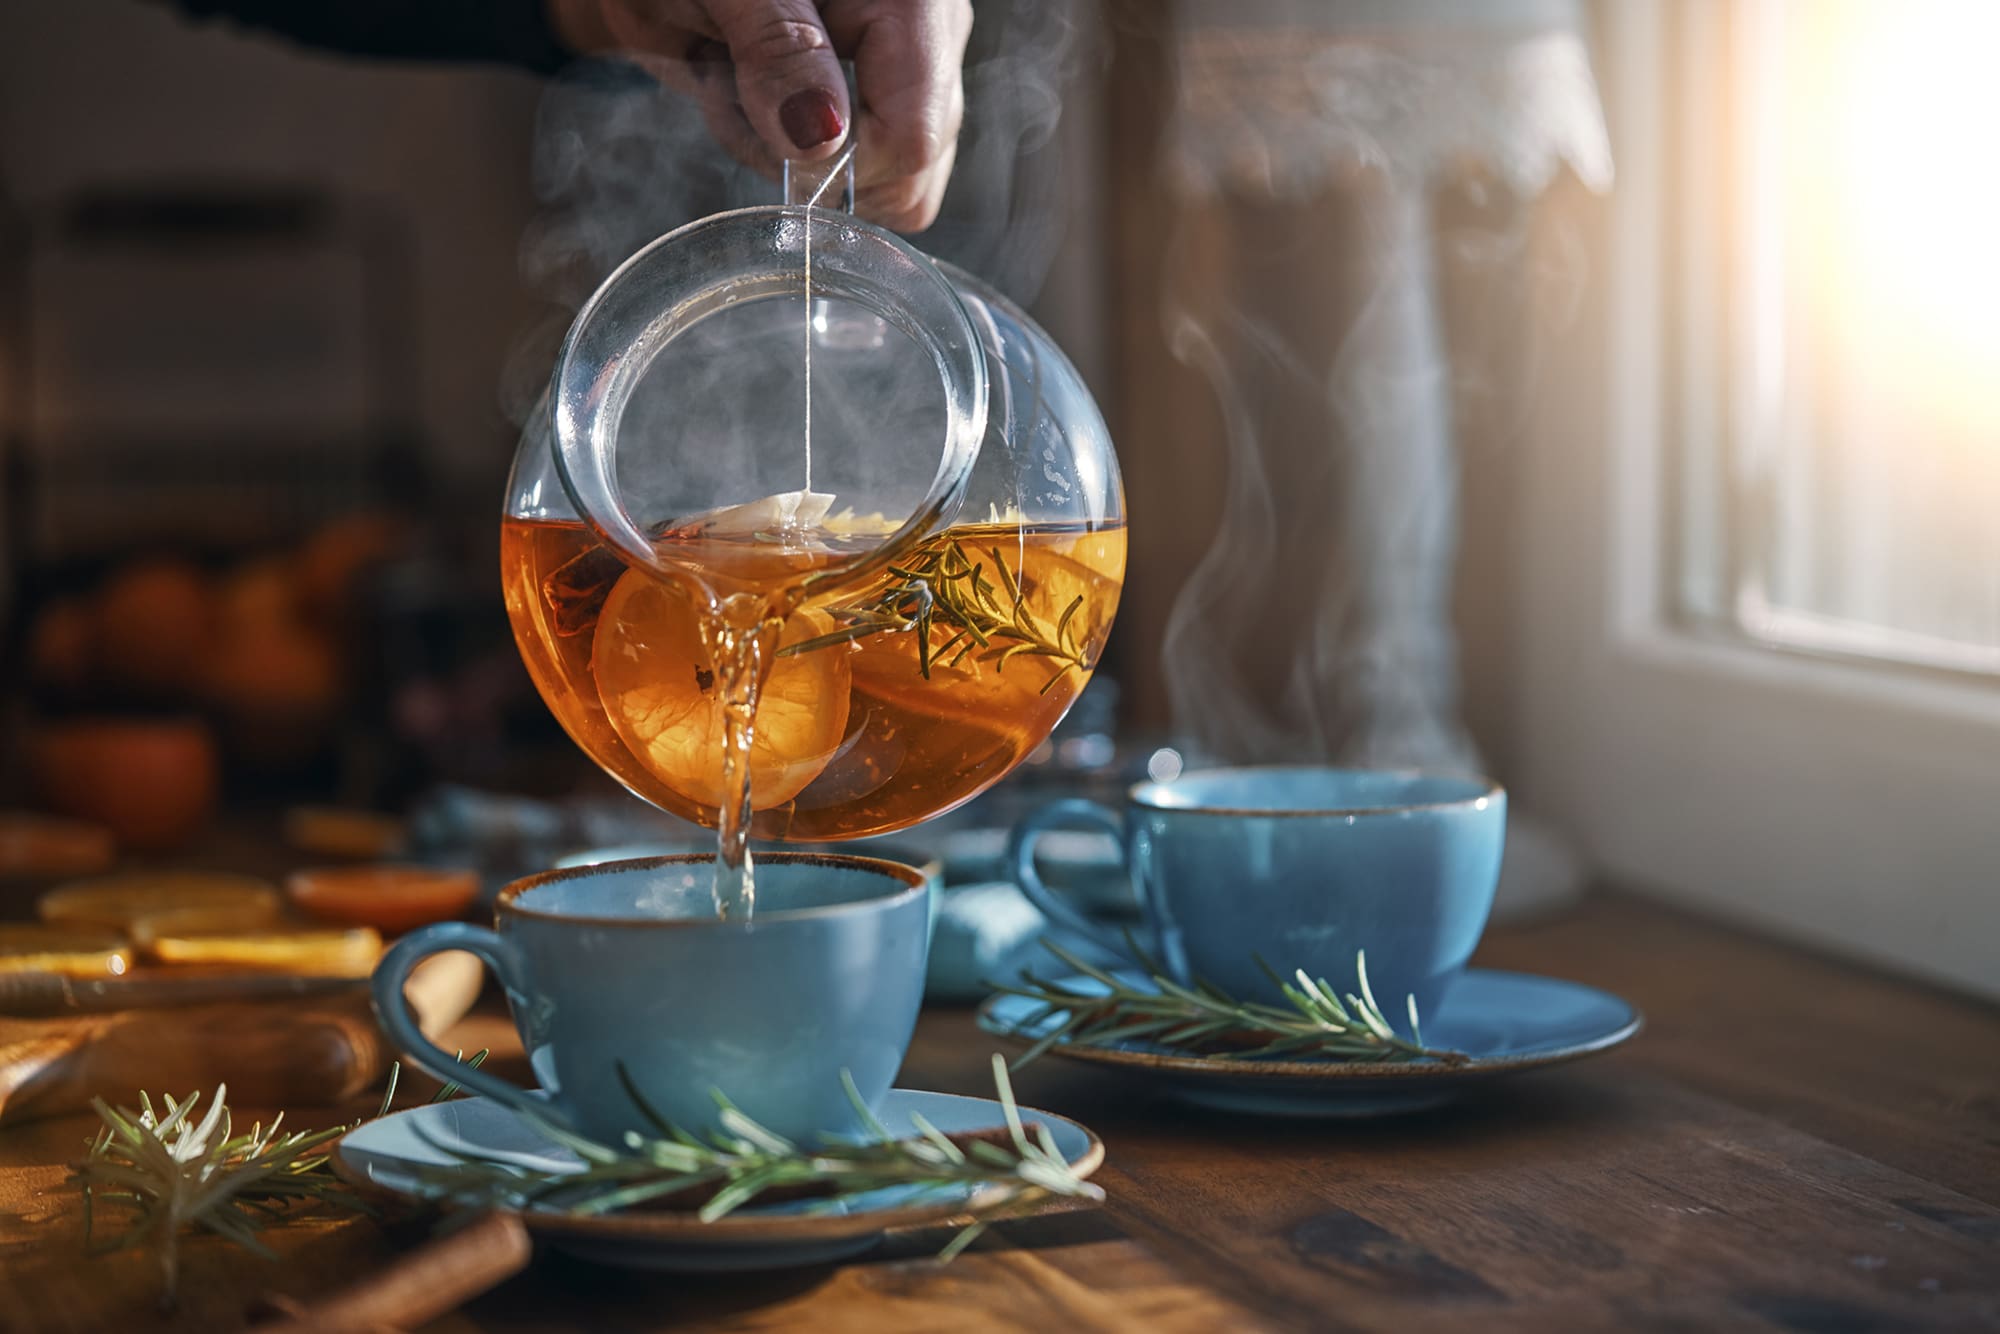 Fruit Tea with Oranges, Cinnamon and Rosemary